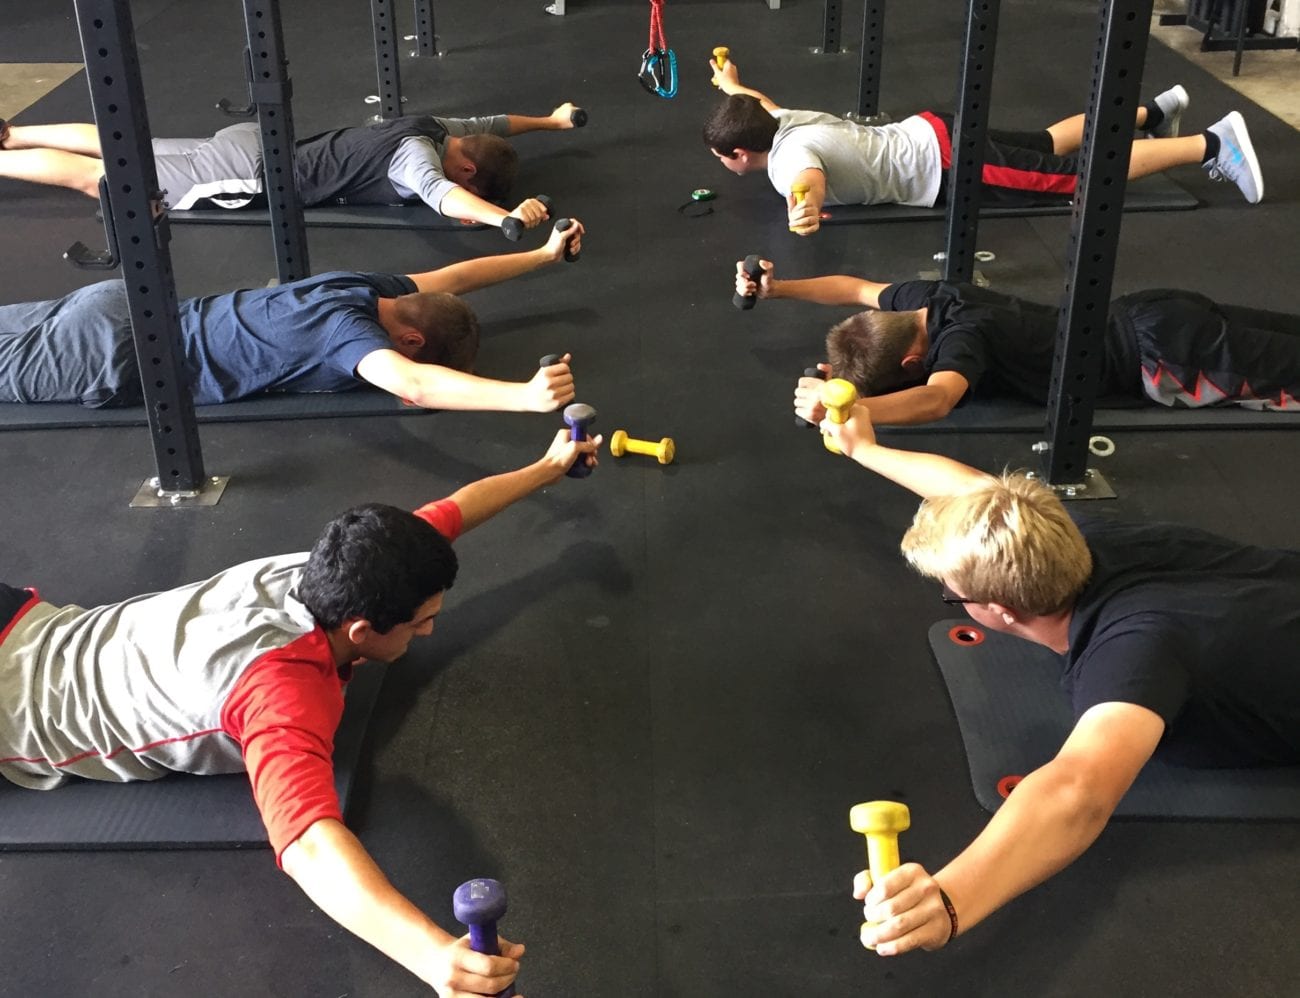 Advanced Shoulder Care In a Group Setting